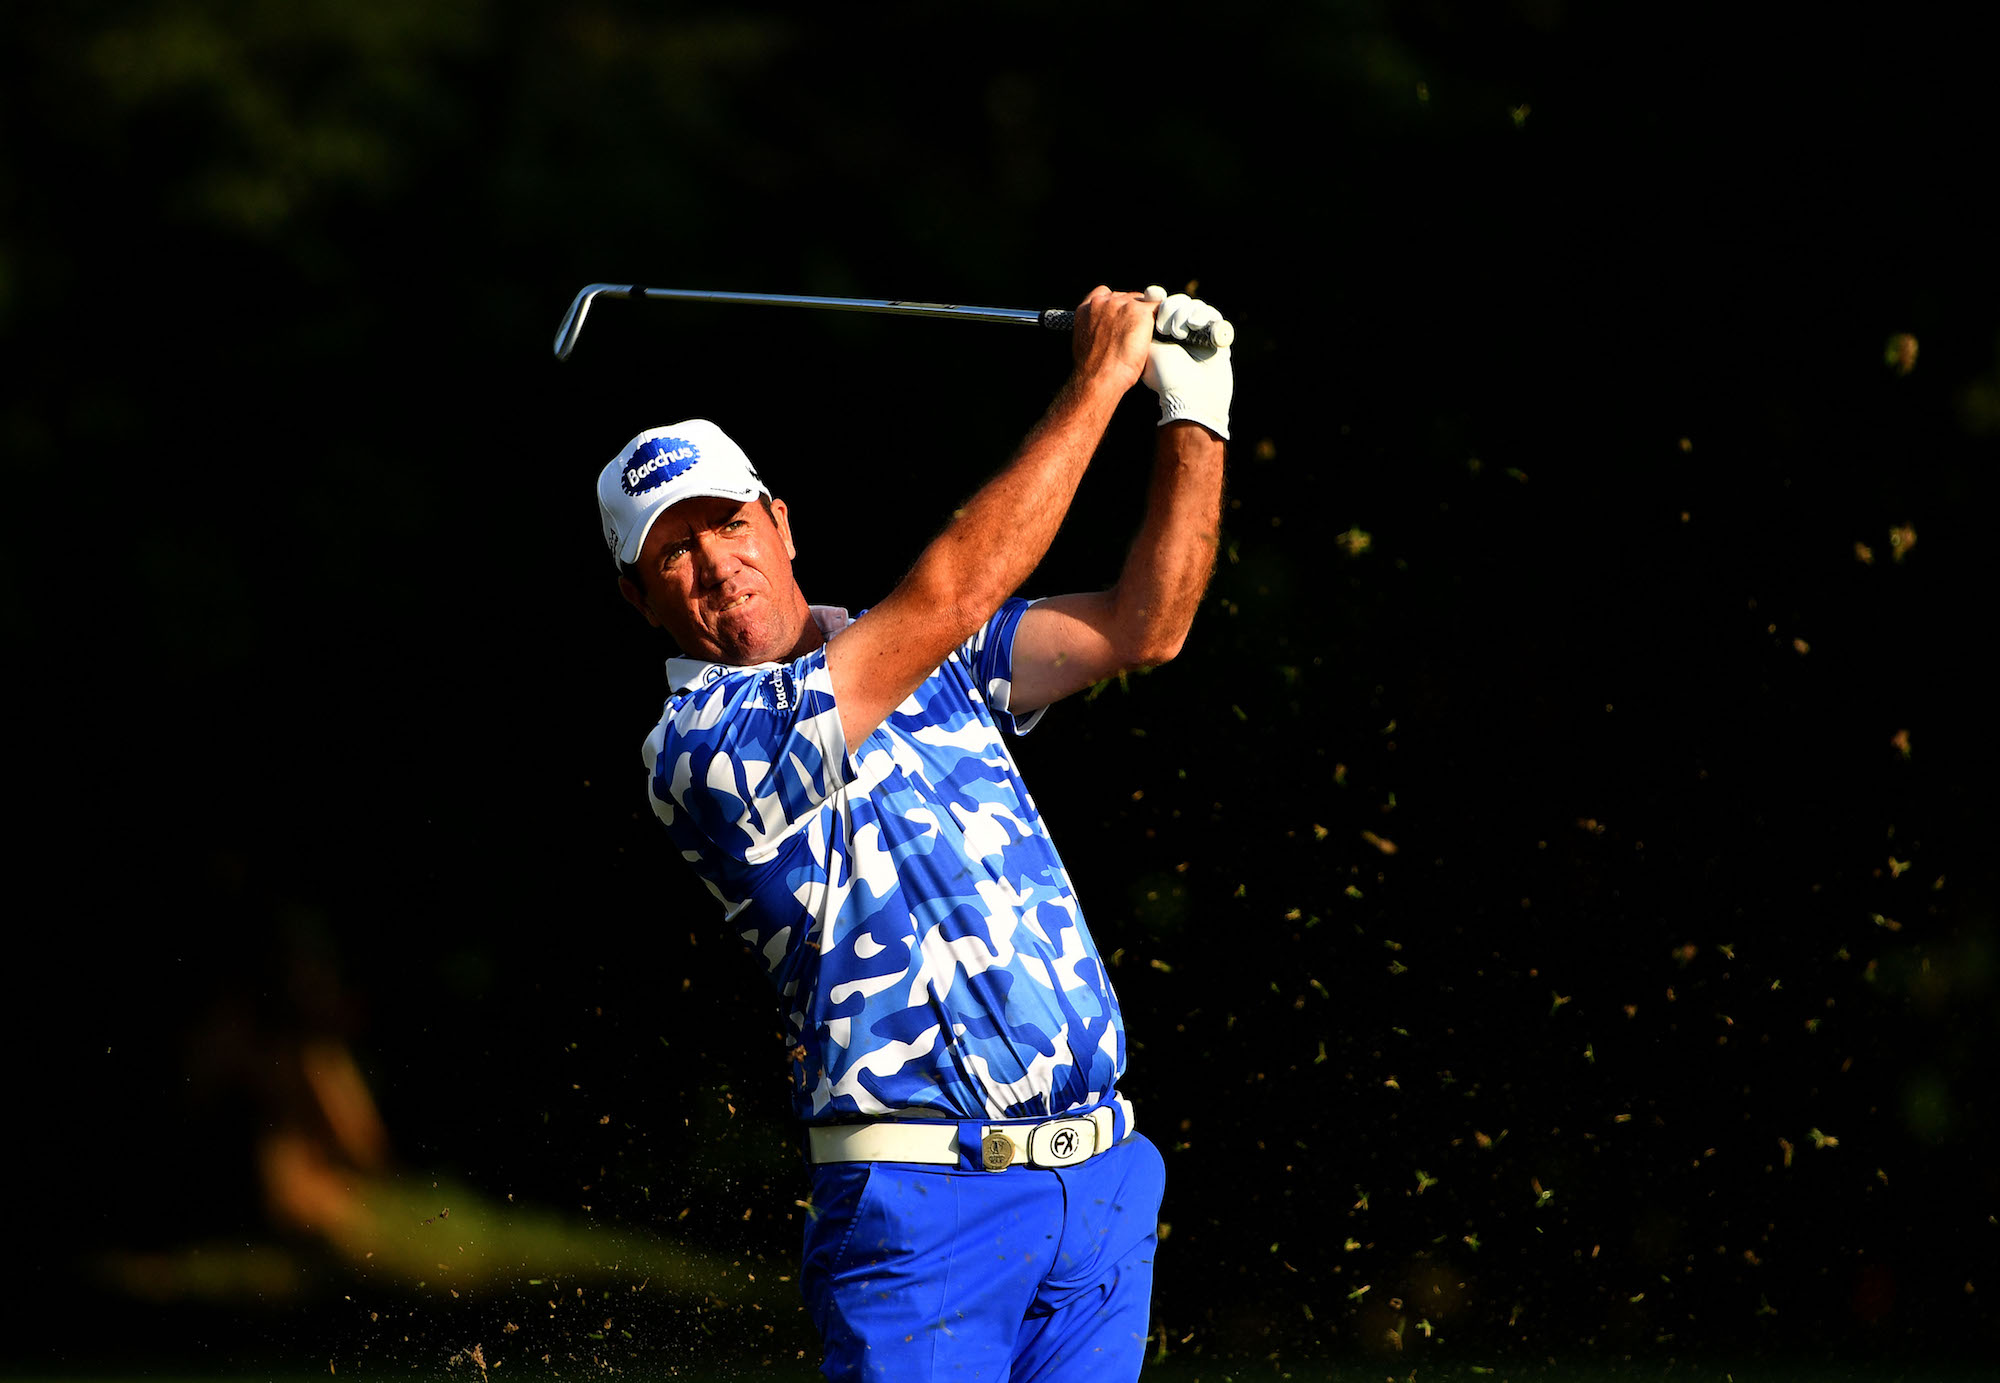 HEND WINS ASIAN TOUR PLAYERS’ PLAYER OF THE YEAR 2016 AWARD